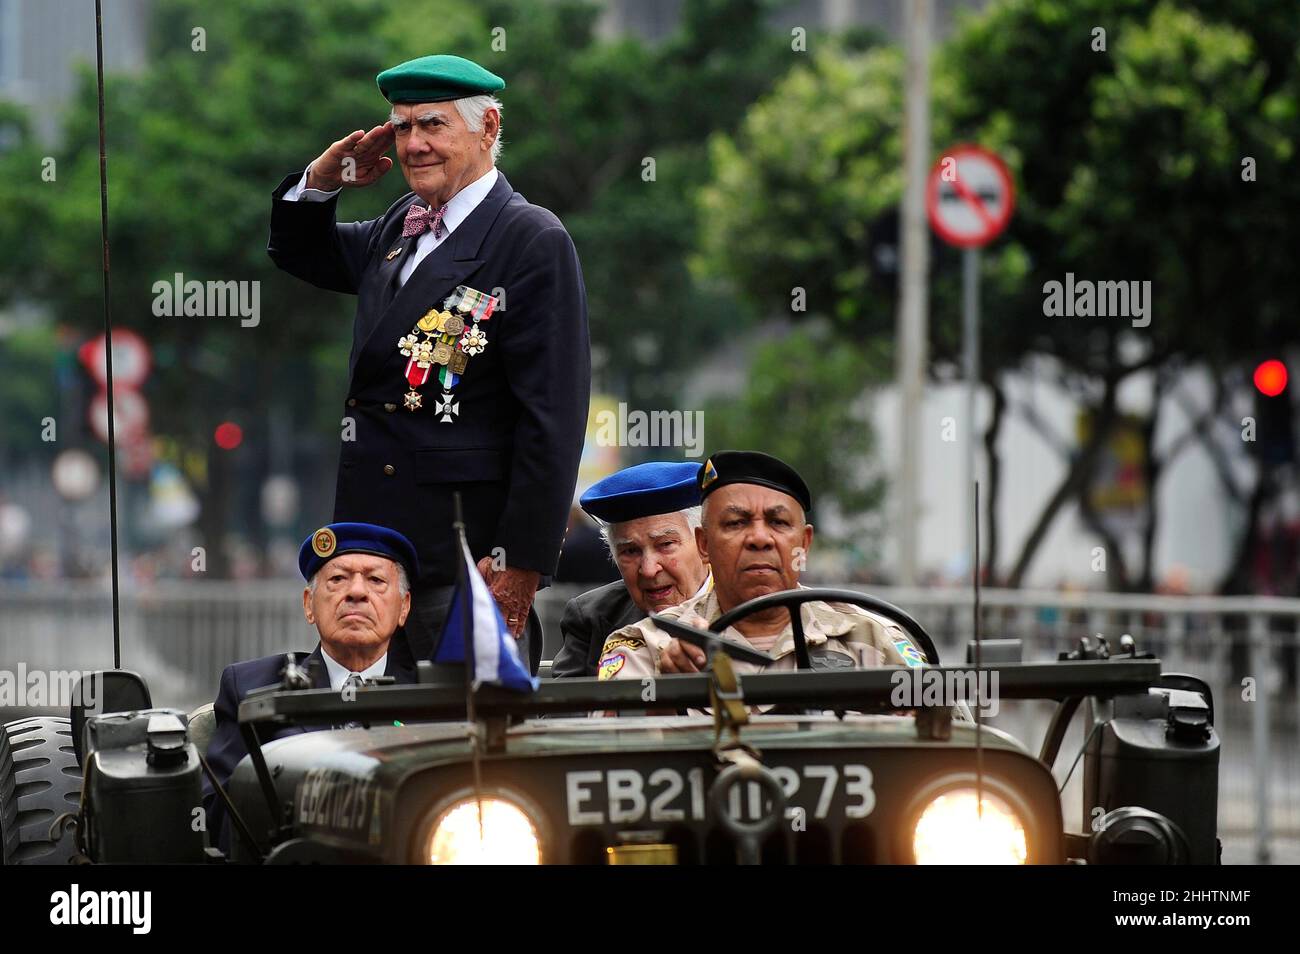 Military veterans parade on Independence Day. Tribute to brazilian armed forces retired troops from Second World War, marching on street Stock Photo